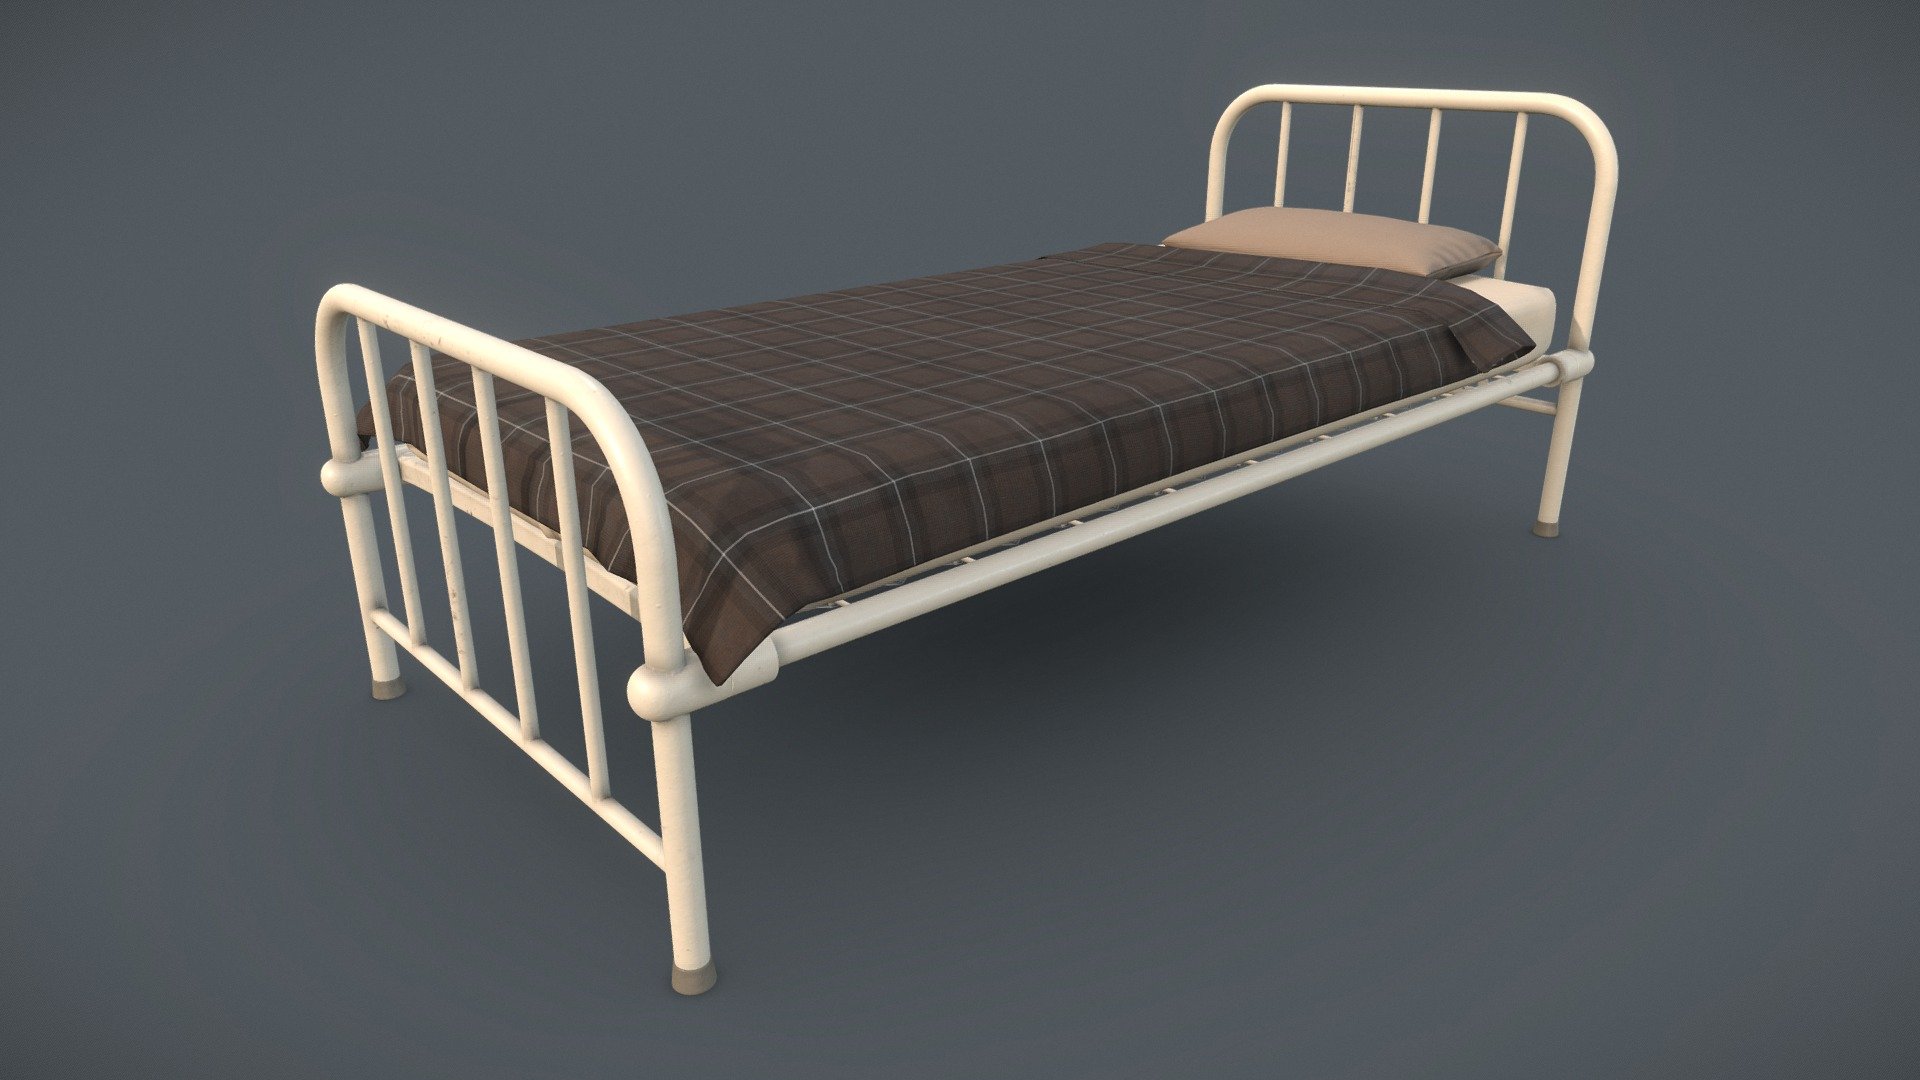 Vintage Hospital Bed 4K PBR Game-Ready

In order to internalize and learn about the workflow for videogames, I decided to take the course &ldquo;Realistic Prop Creation for Video Games